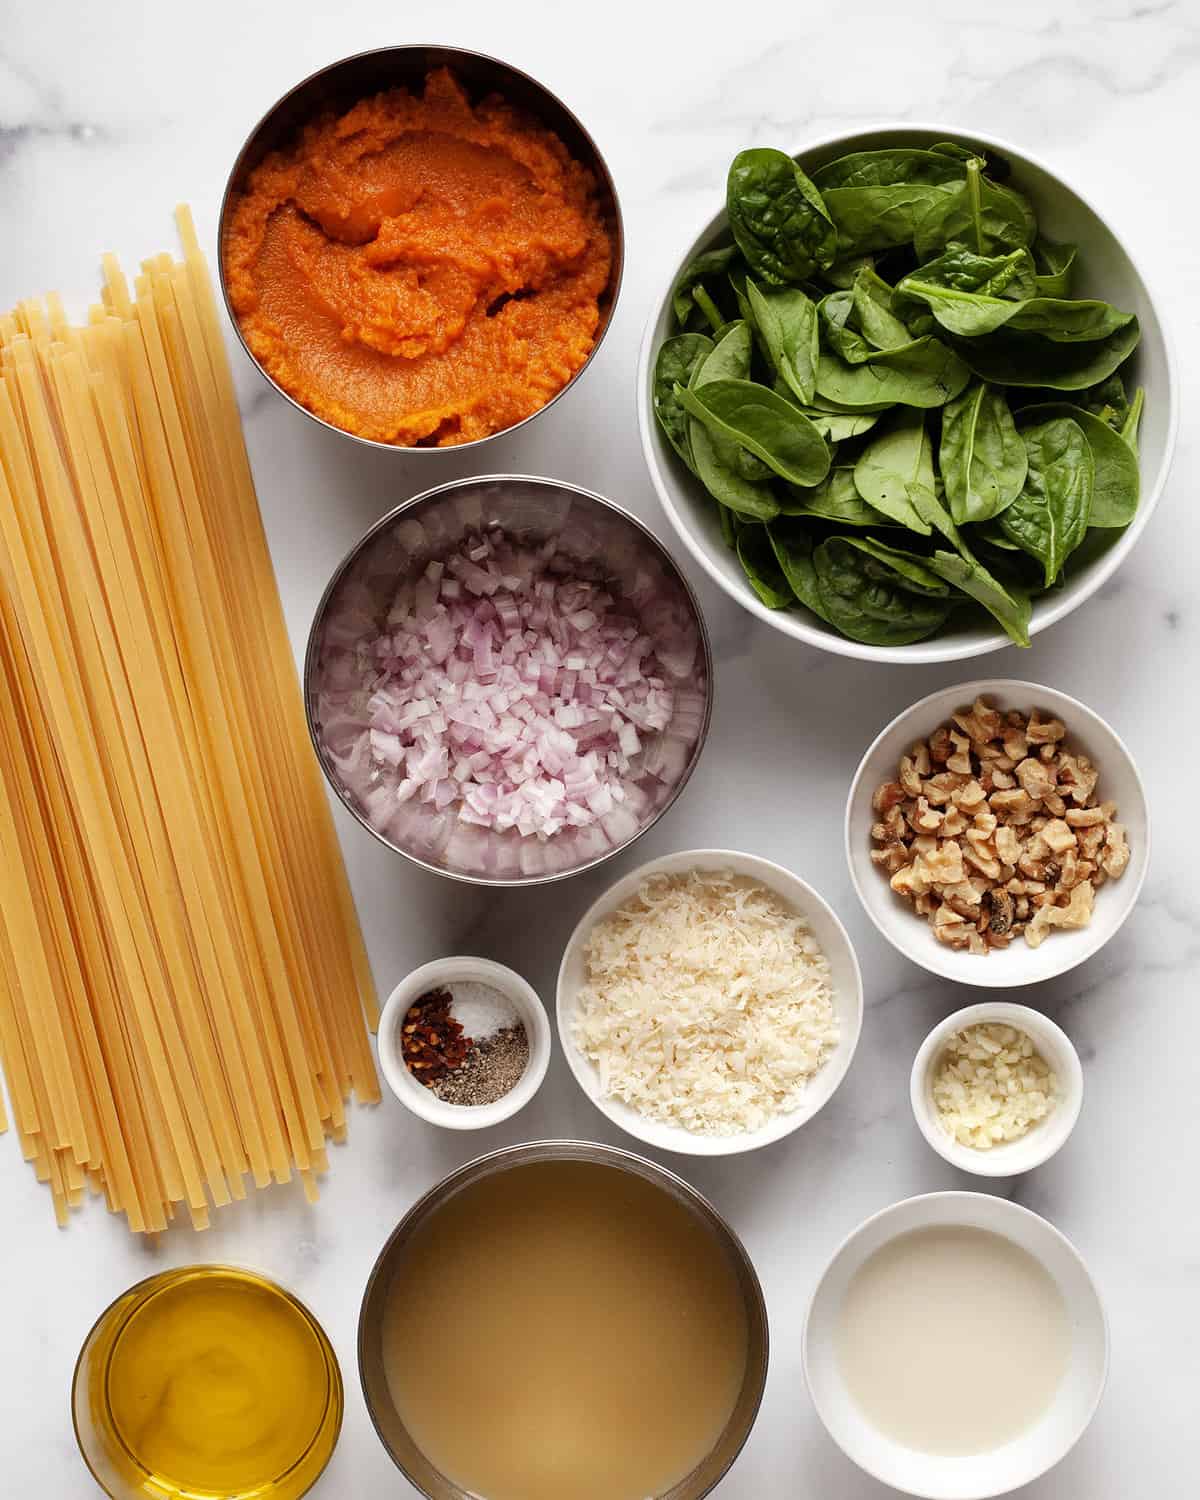 Ingredients including pumpkin puree, pasta, spinach, walnuts, parmensa, milk, vegetable broth, shallots, spices and garlic.